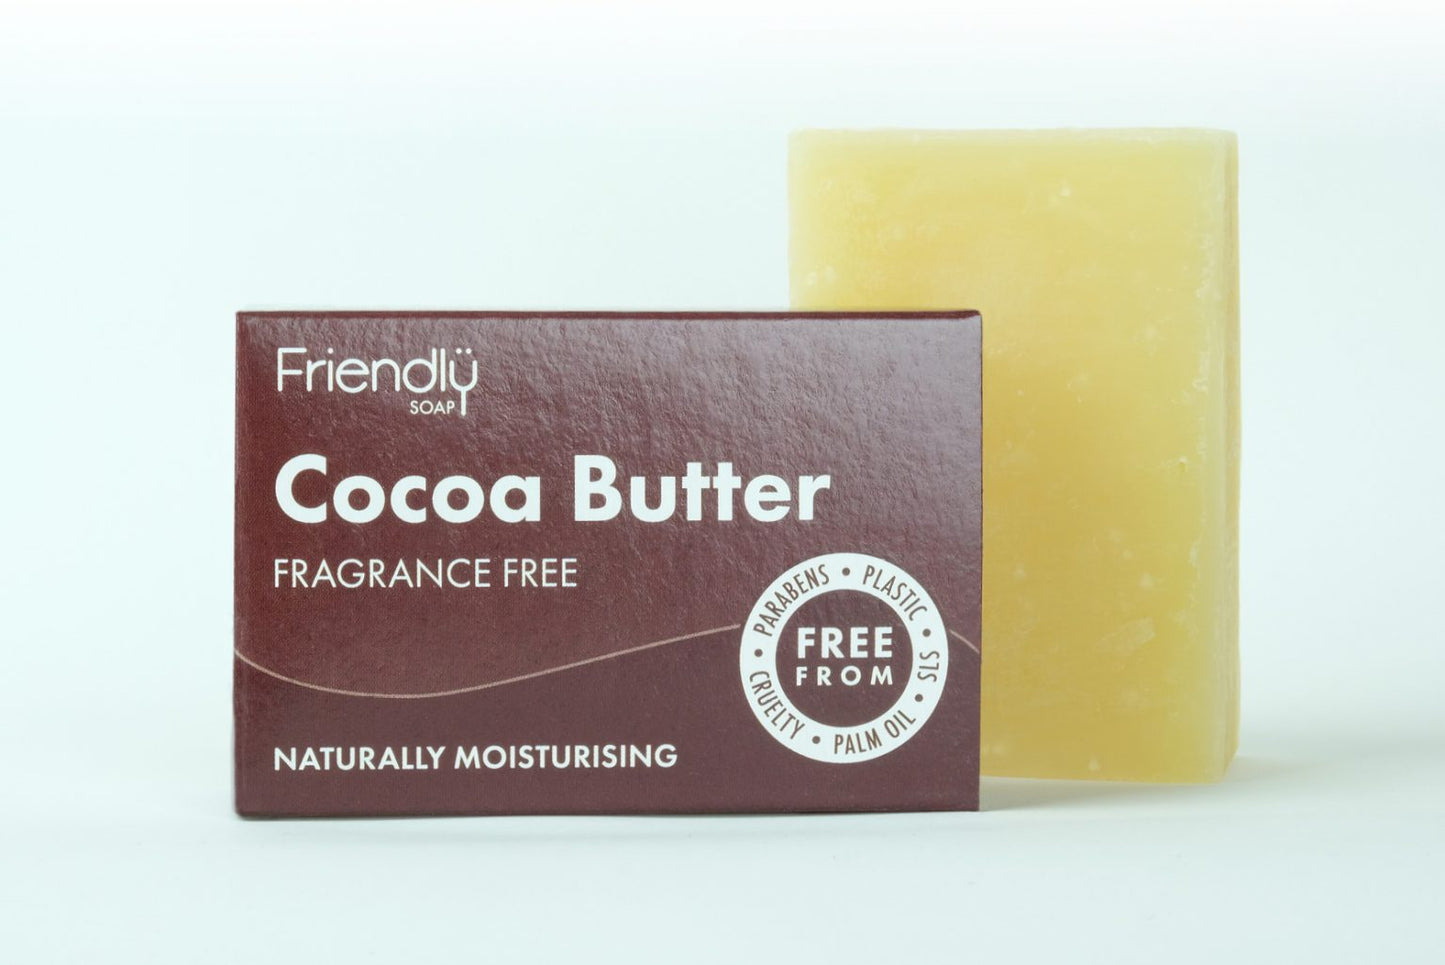 Friendly Soap Cocoa Butter Cleansing Bar | Vegan | Plastic Free | Cruelty Free | Eco-Friendly Beauty | Natural | Low Waste | Facial Soap | Anti Aging